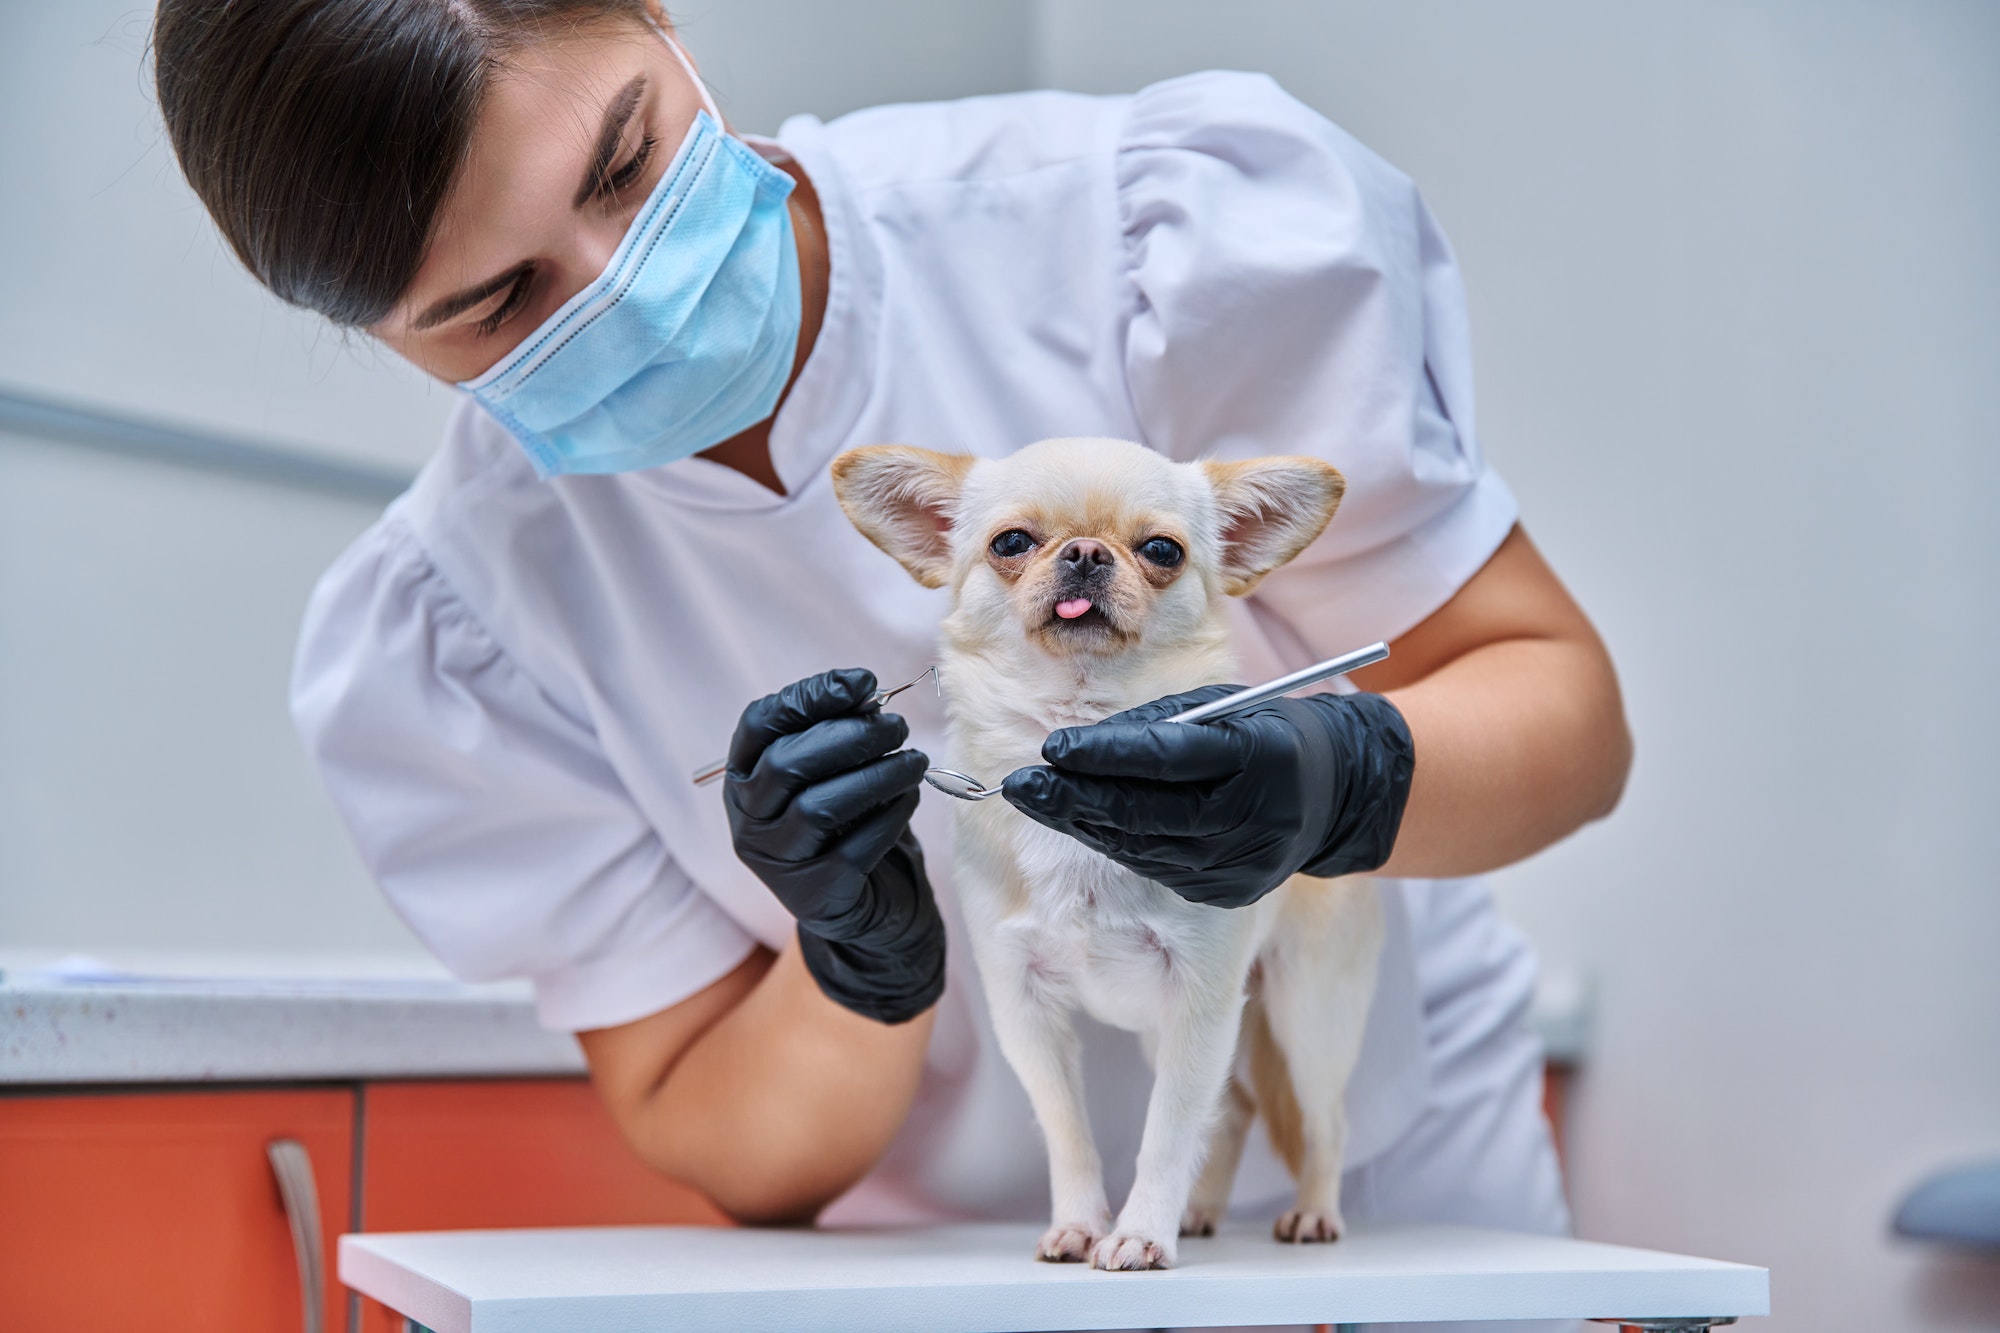 Small chihuahua dog being examined by a dentist doctor in a veterinary clinic. Pets, medicine, care